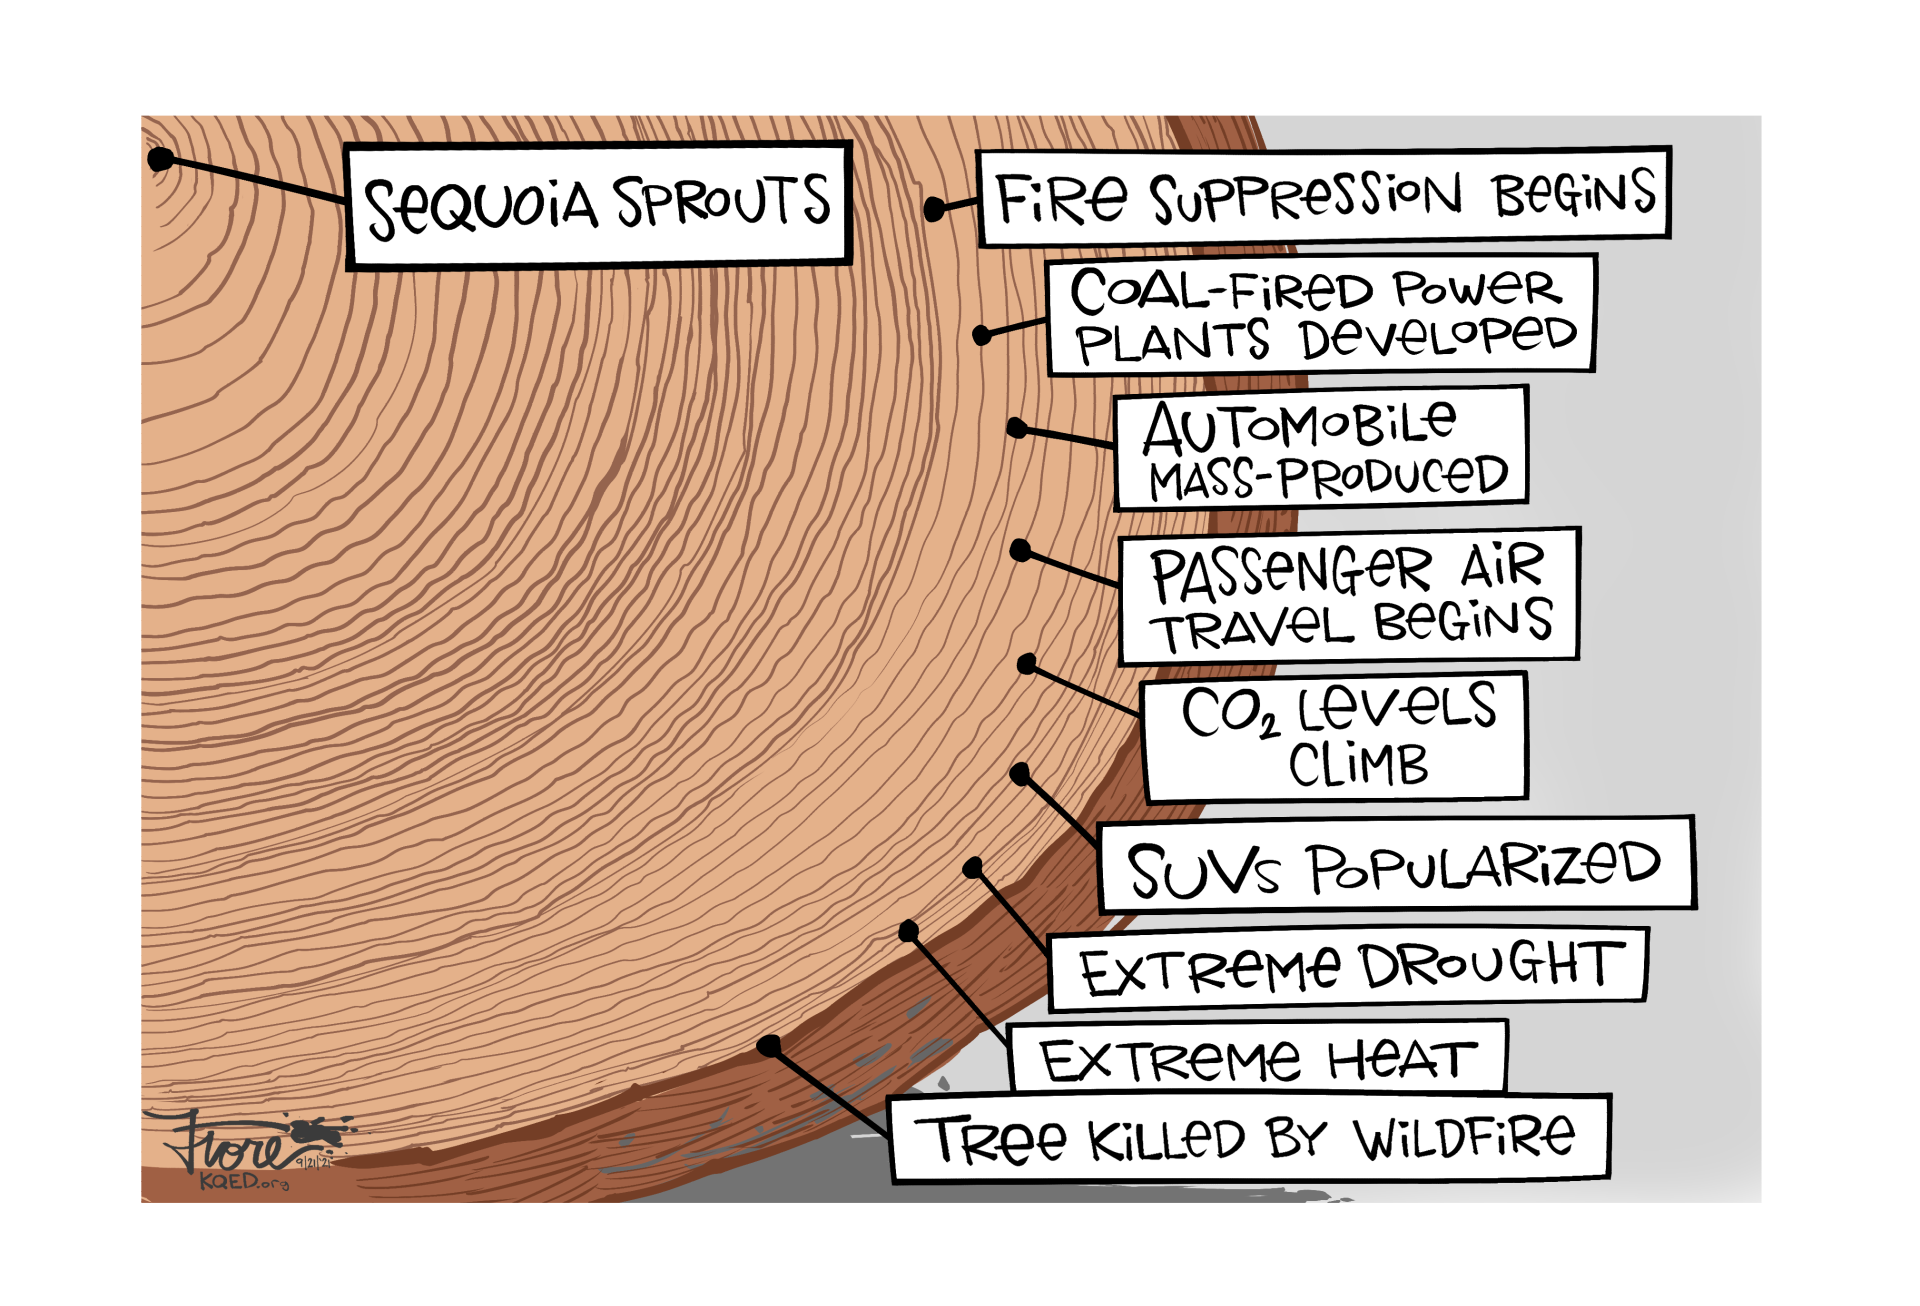 Cartoon: The rings in a cross-section of a giant sequoia labeled to show when the tree sprouted to when fire suppression began on to when the tree died in a wildfire.